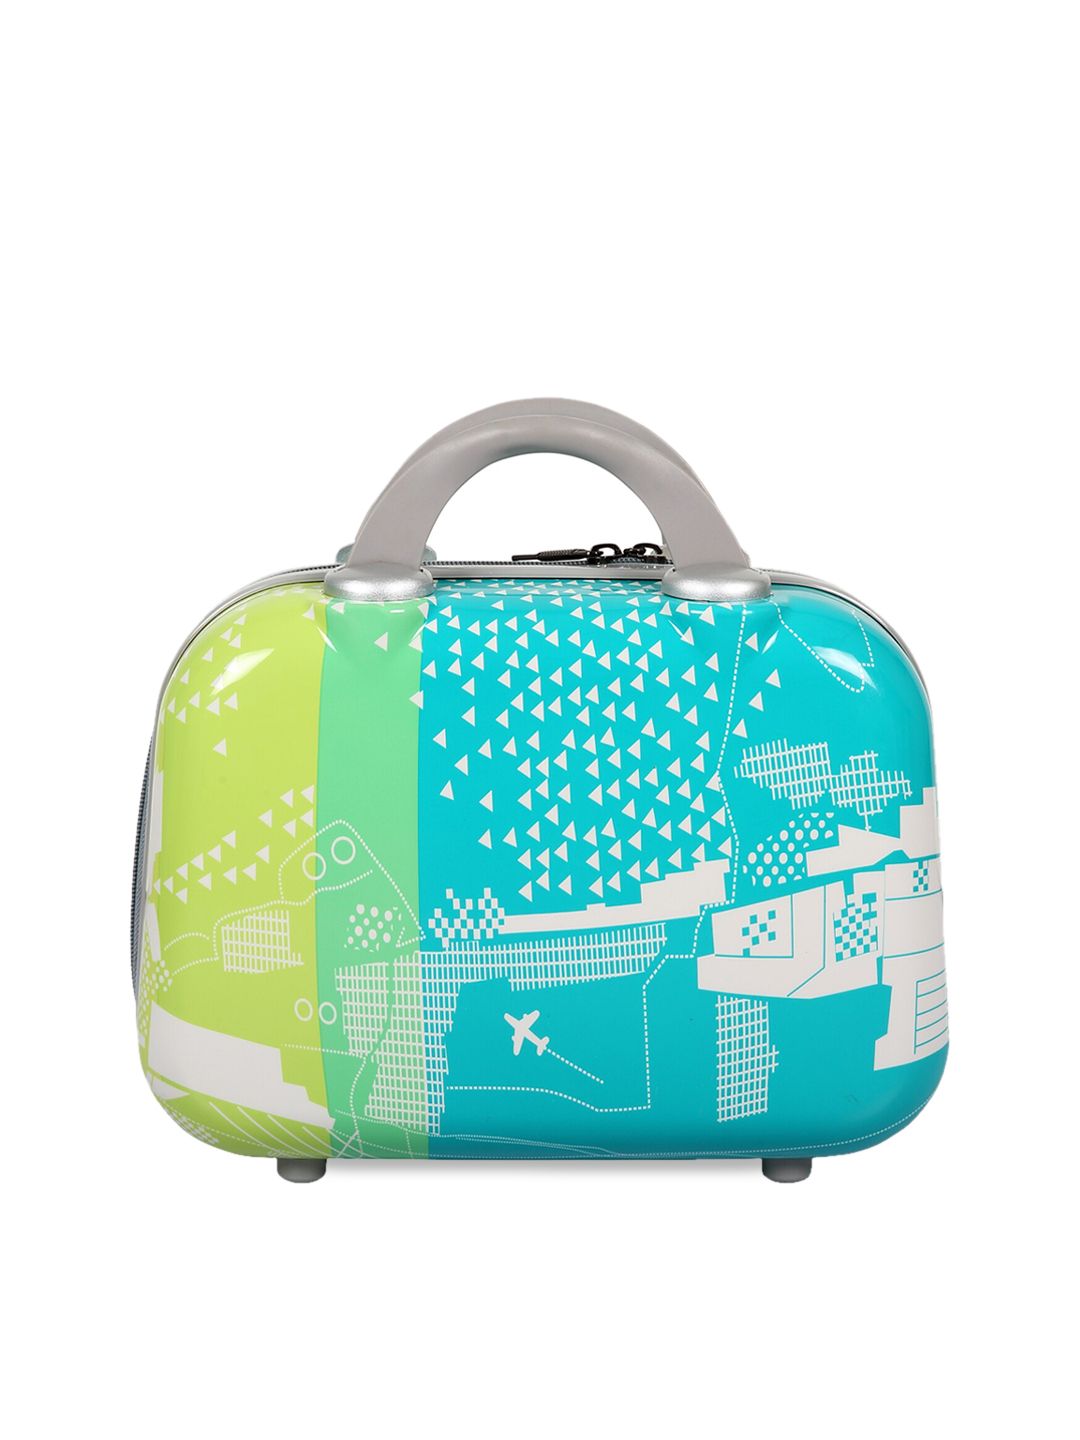 Polo Class Green Printed Travel Vanity Bag Price in India